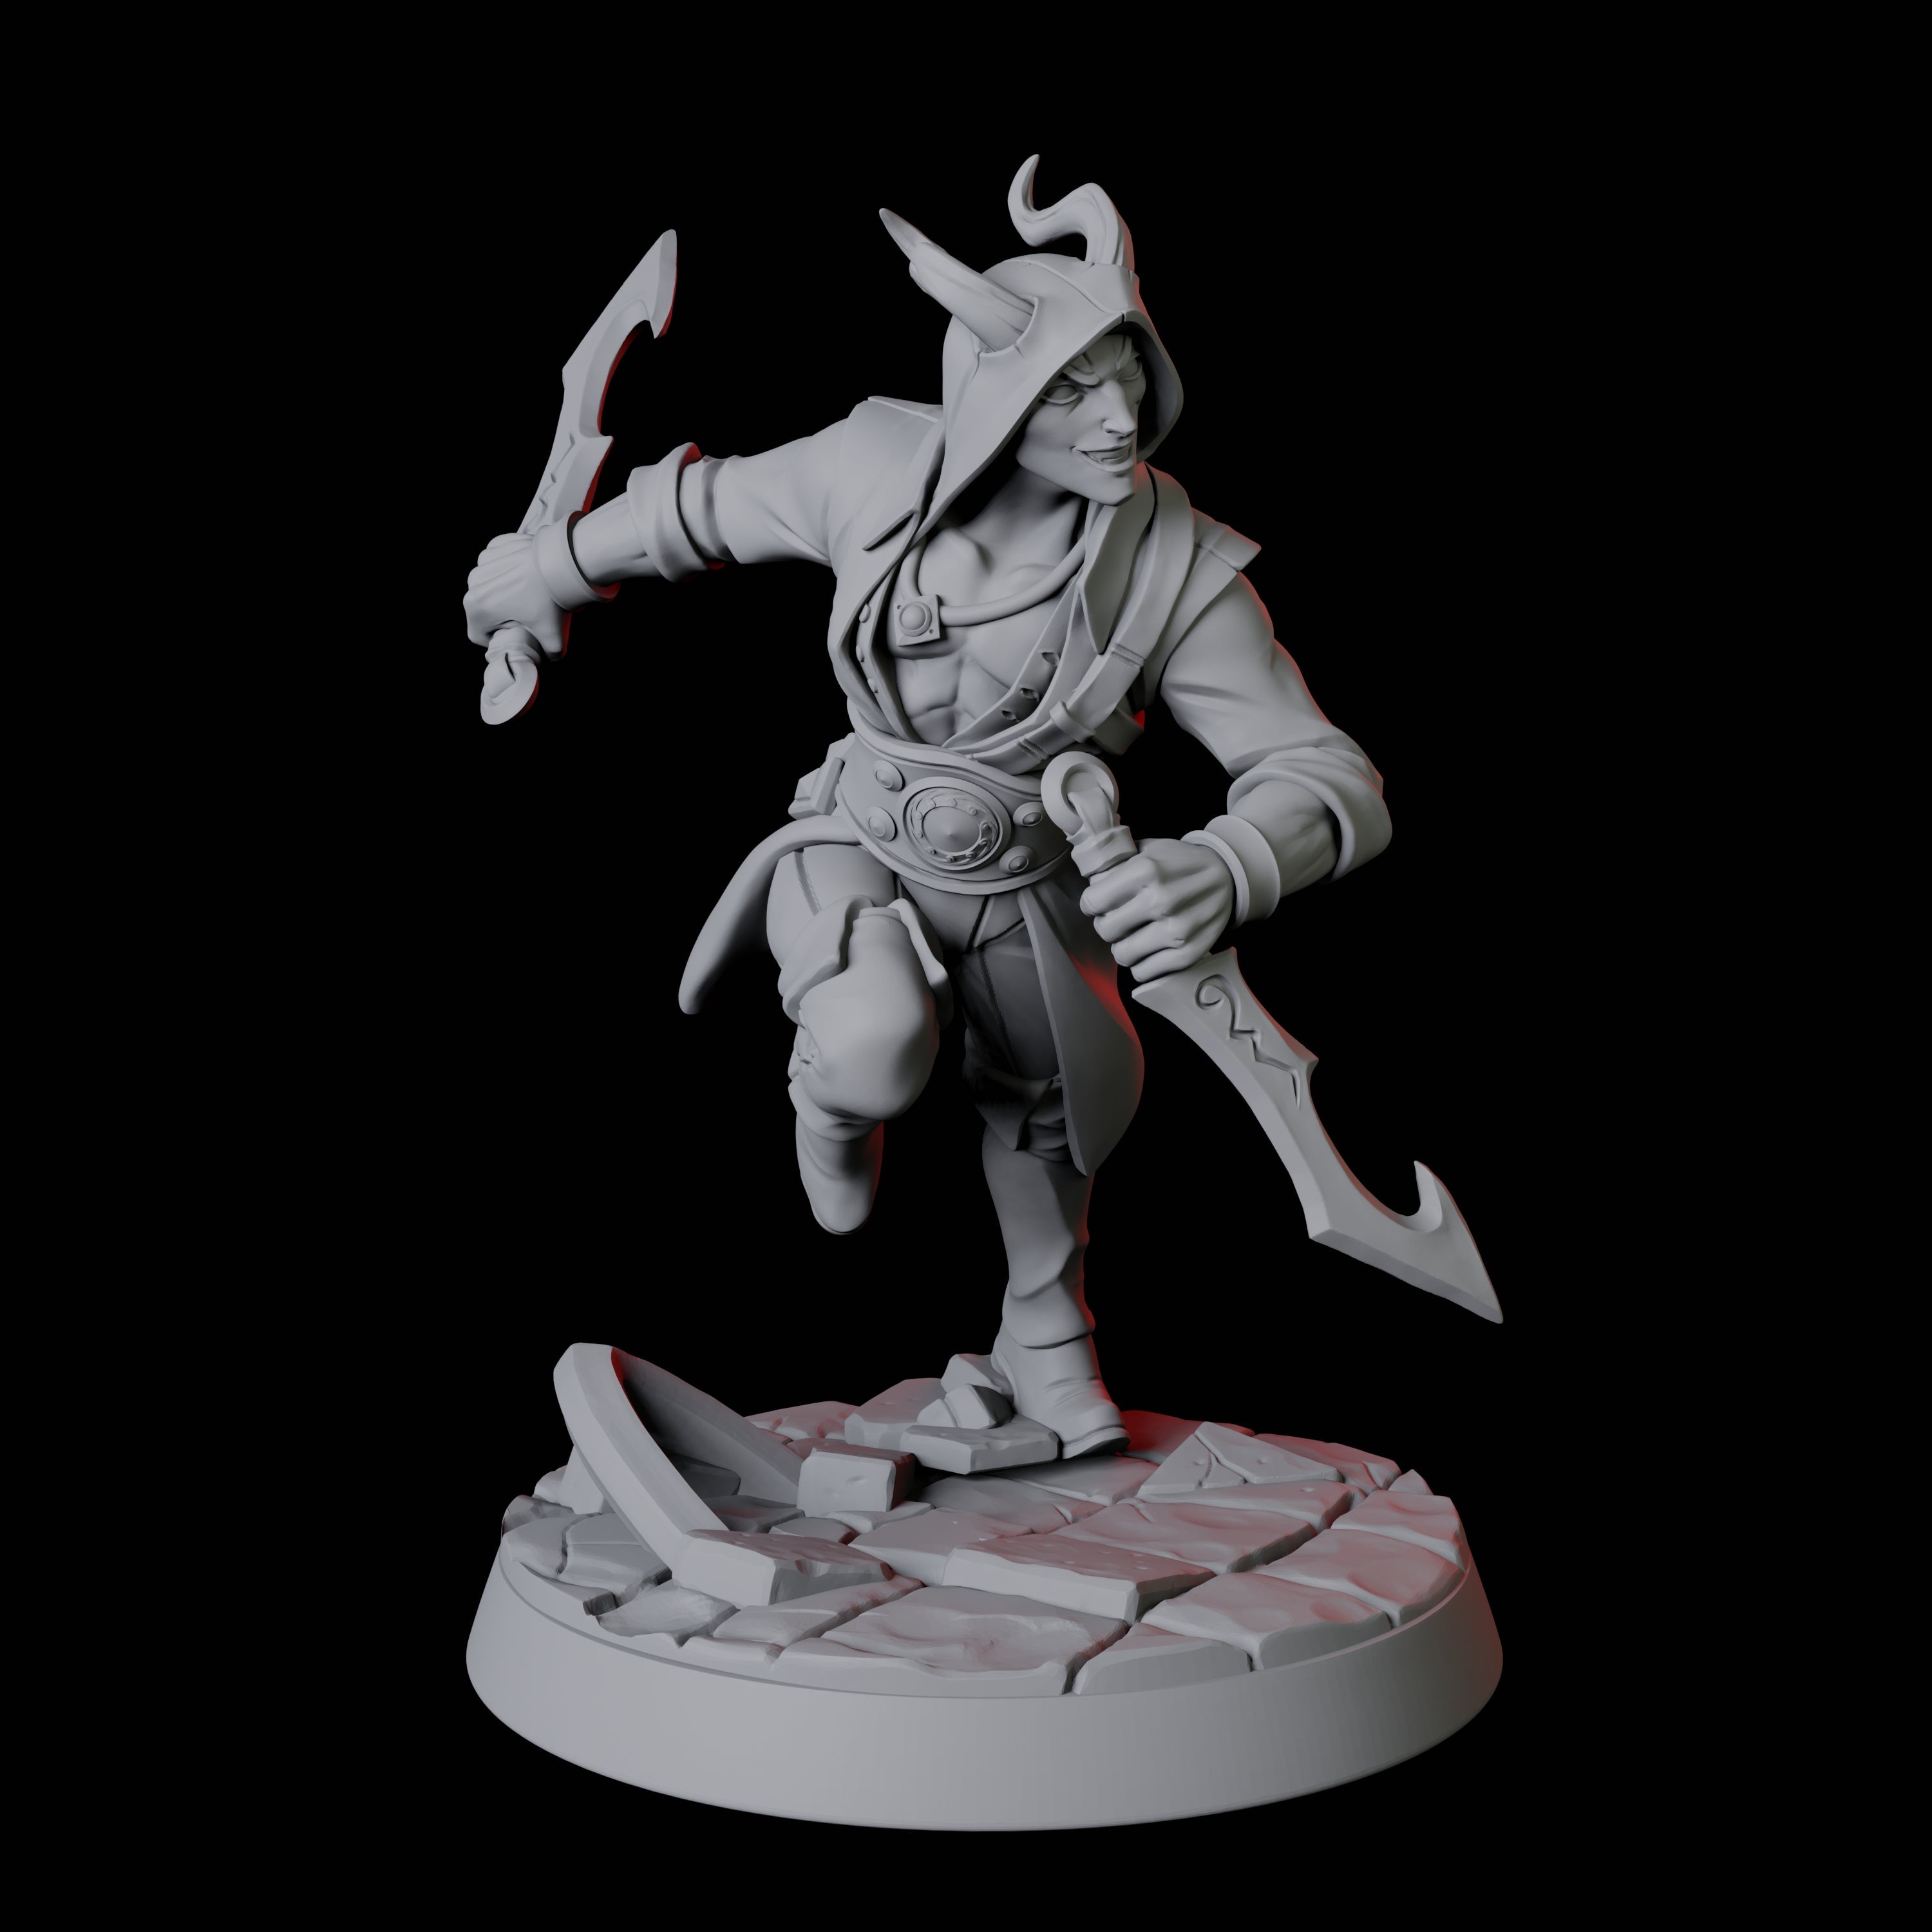 Tiefling Rogue A Miniature for Dungeons and Dragons, Pathfinder or other TTRPGs